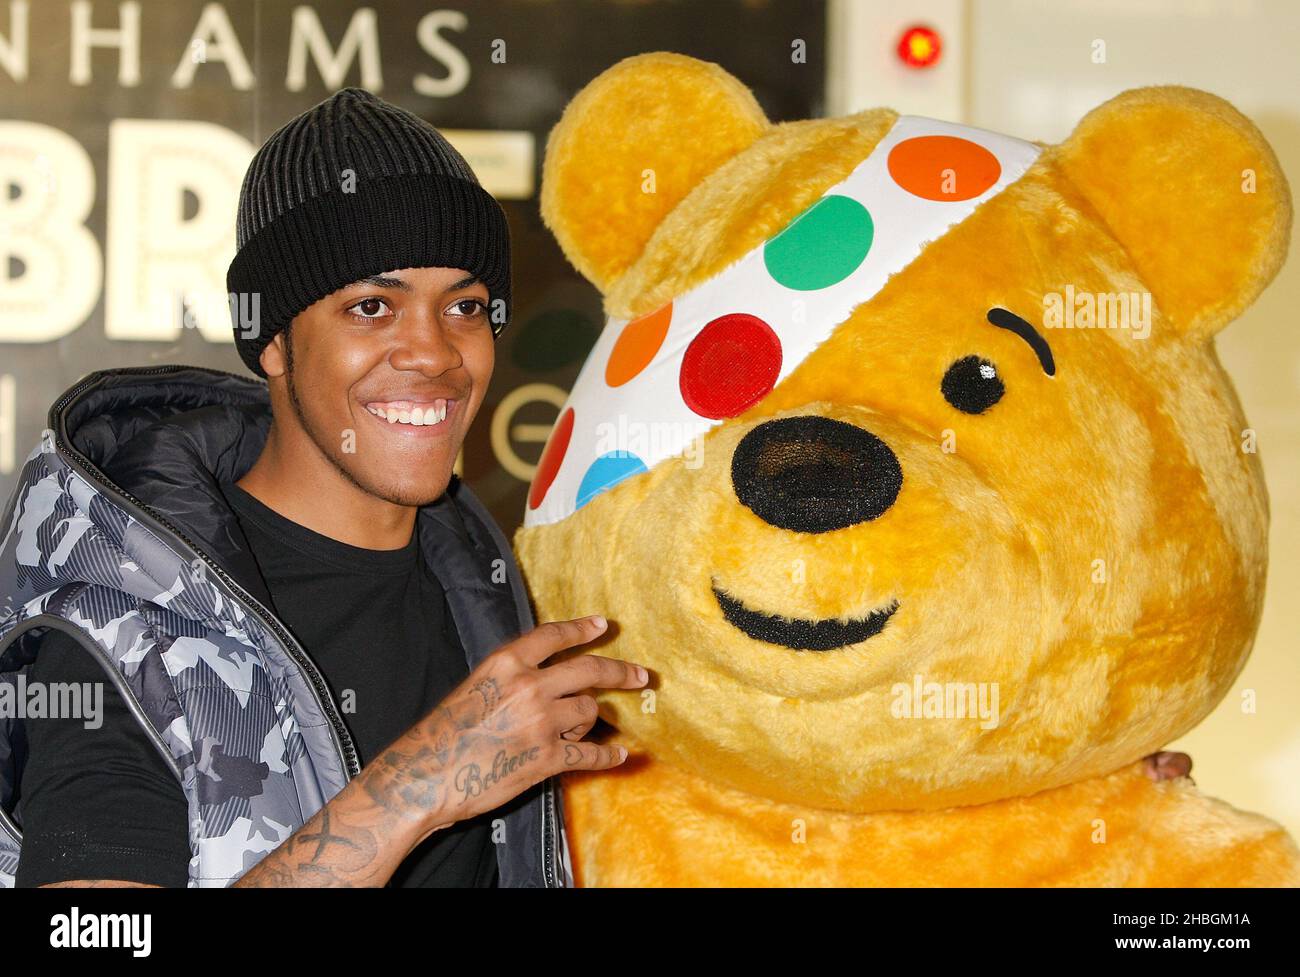 Chipmunk celebrates the launch of the BBC Children in Need Celebrity Style Challenge in association with Debenhams in the Oxford Street store window. The celebrities have designed a limited edition clothing collection to help raise money for BBC Children in Need. Stock Photo